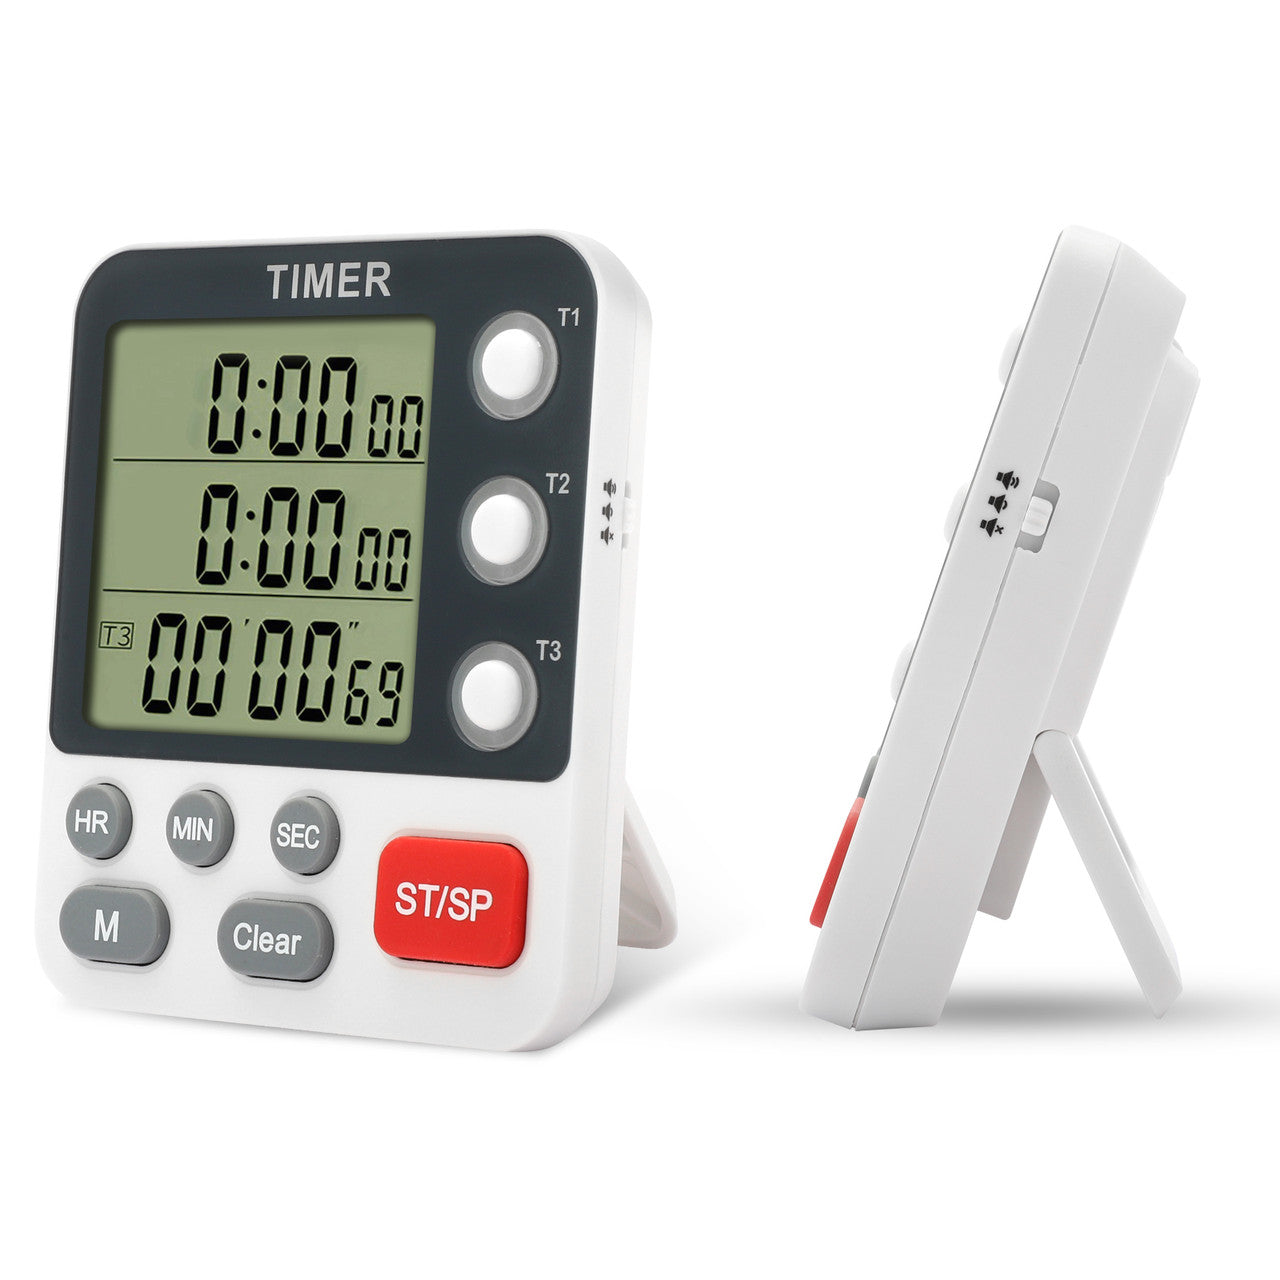 Digital Dual Kitchen Timer - Three Channel Kitchen Timer,Large Display, Loud Volume Alarm and Flashing Light with Magnetic Back (White)